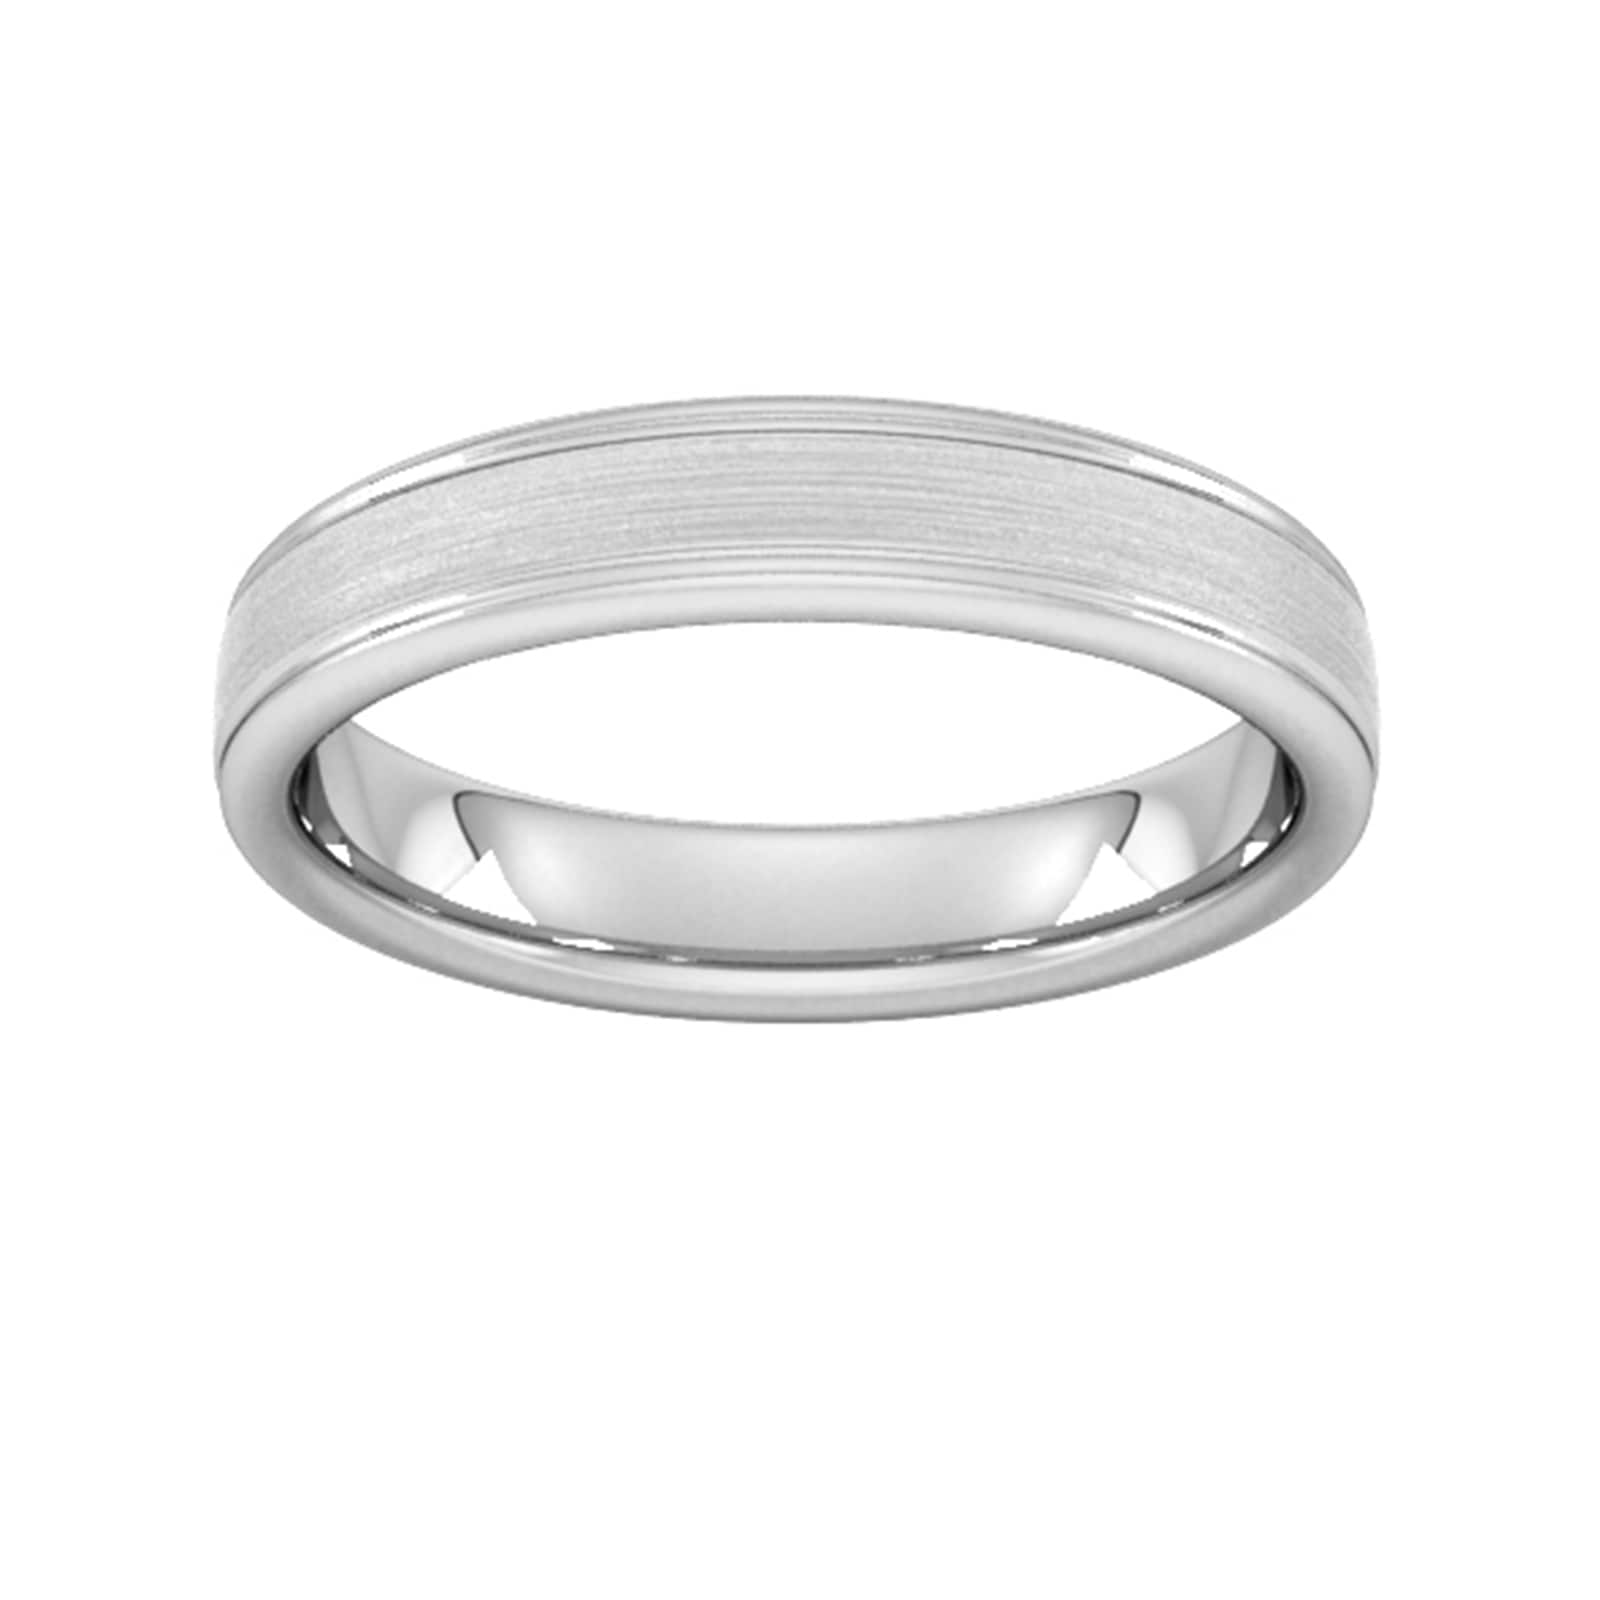 4mm D Shape Heavy Matt Centre With Grooves Wedding Ring In 18 Carat White Gold - Ring Size Q